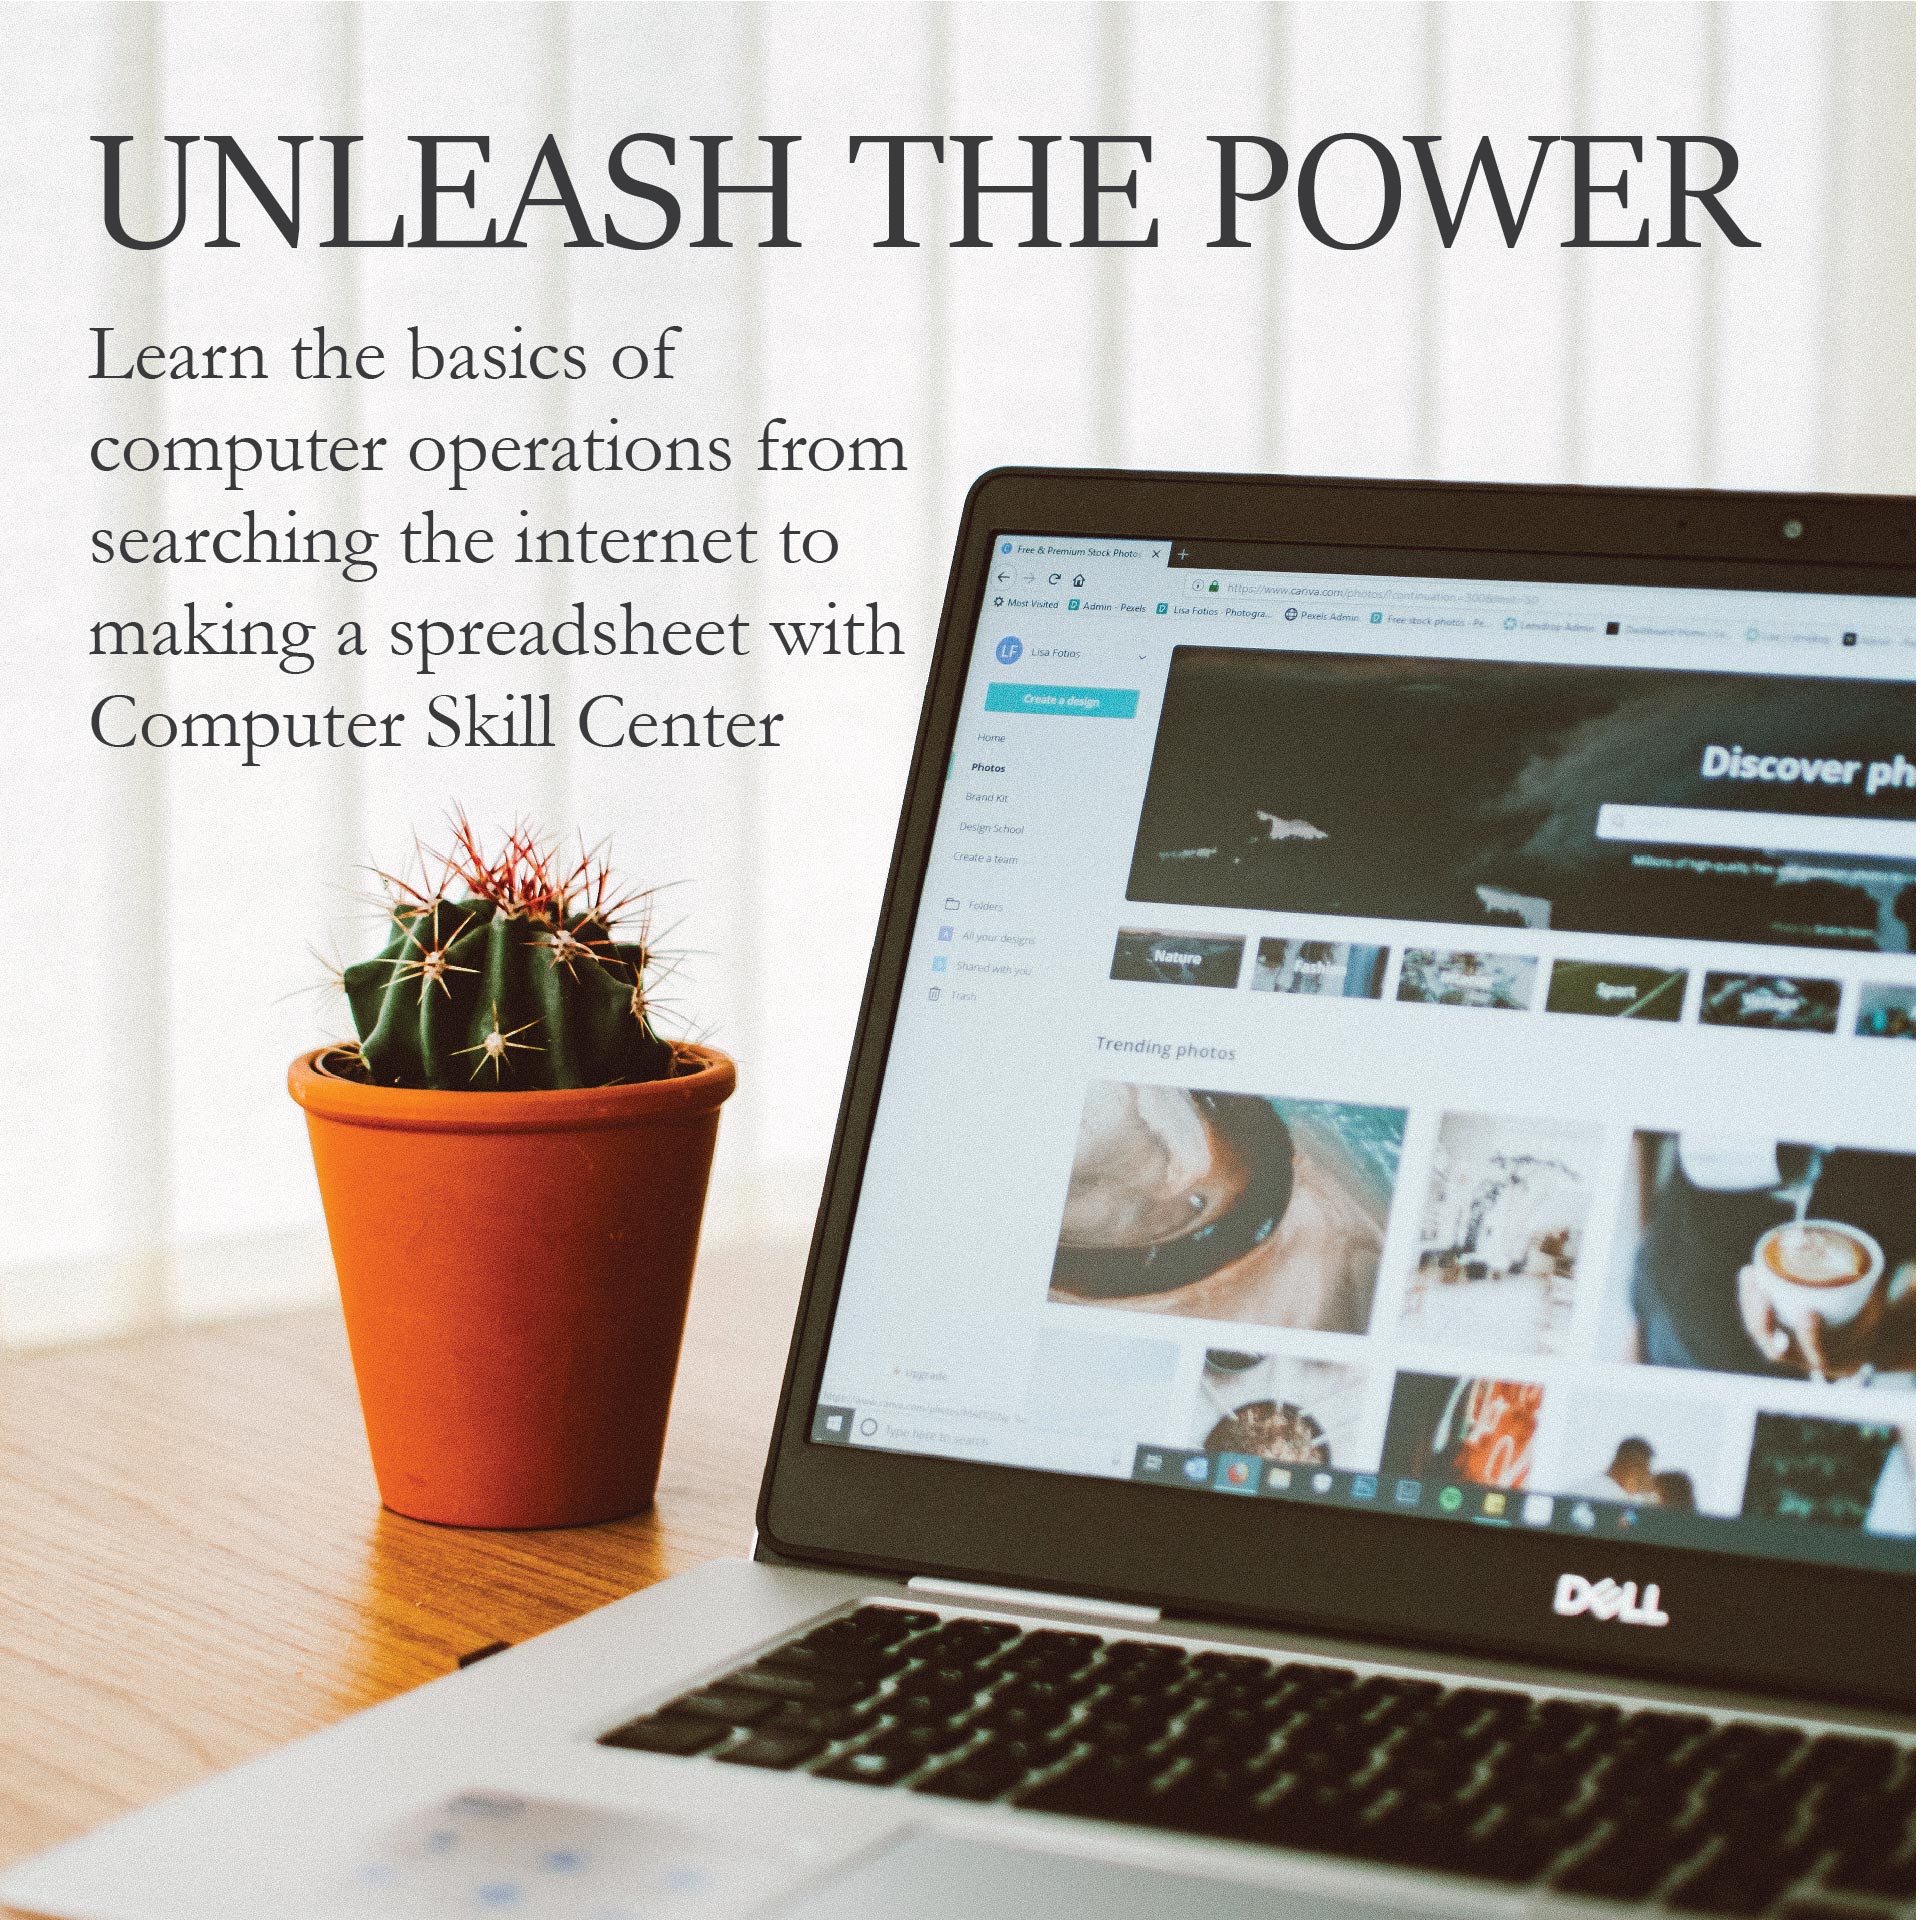 Unleash the Power - Discover the power of your computer from searching the internet to making a spreadsheet with Computer Skill Center